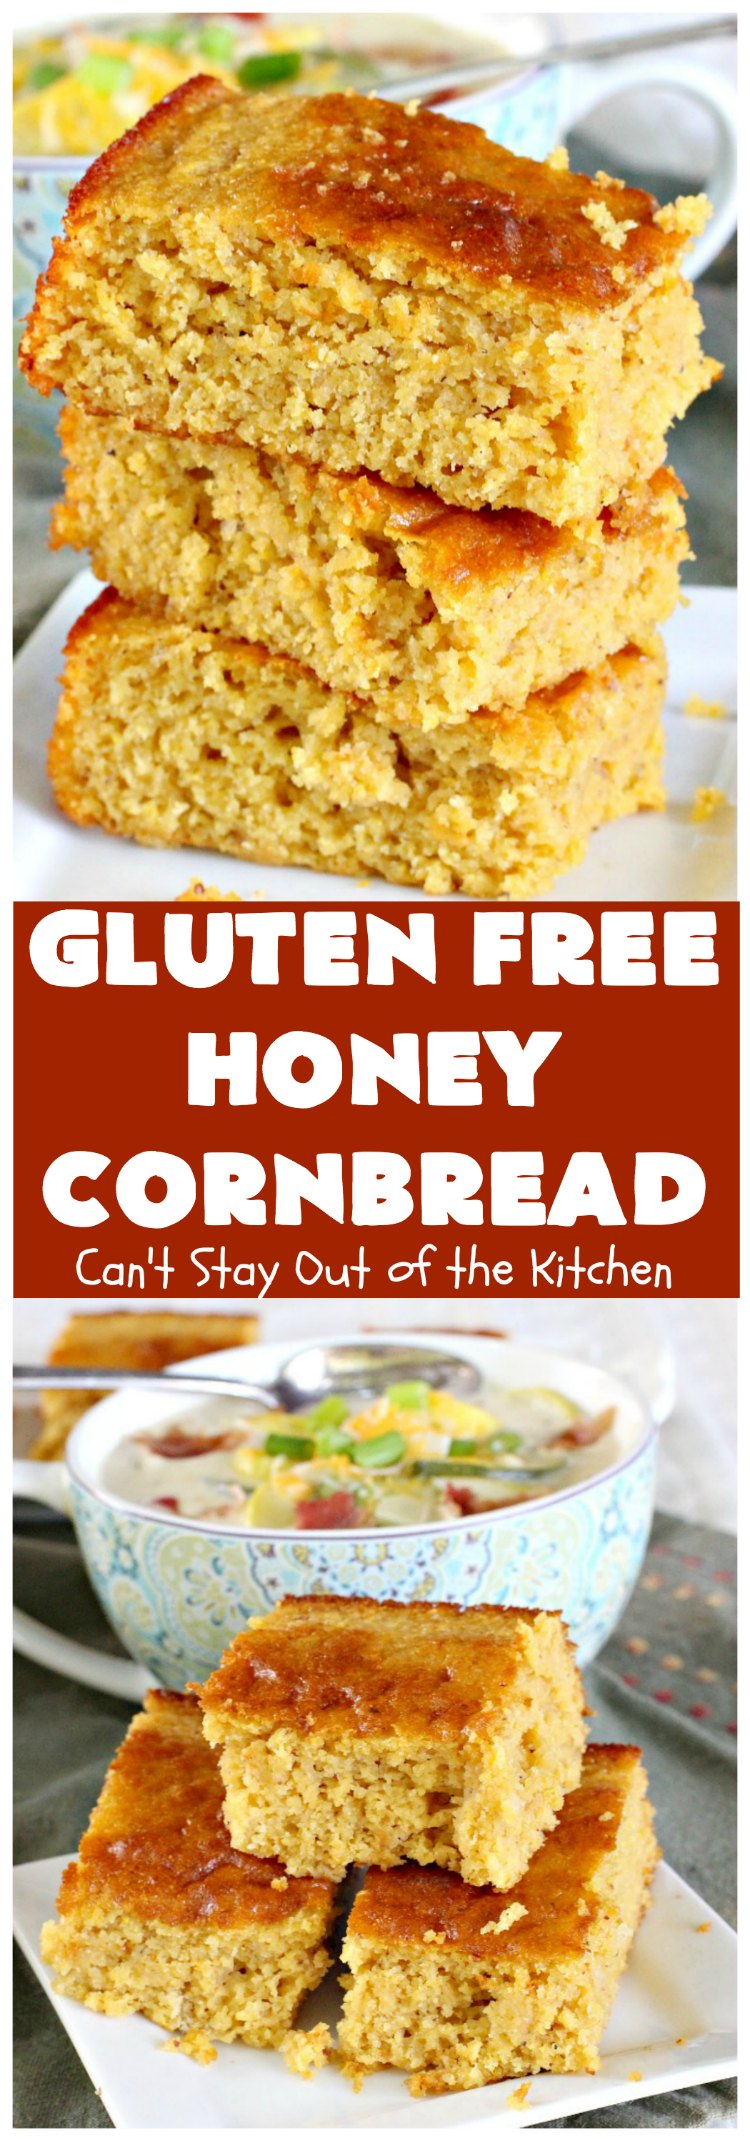 Gluten Free Honey Cornbread | Can't Stay Out of the Kitchen | This is my favorite #cornbread #recipe. I can eat the whole batch by myself! Terrific with soups, chili or any Tex-Mex entree. #GlutenFree #GlutenFreeHoneyCornbread